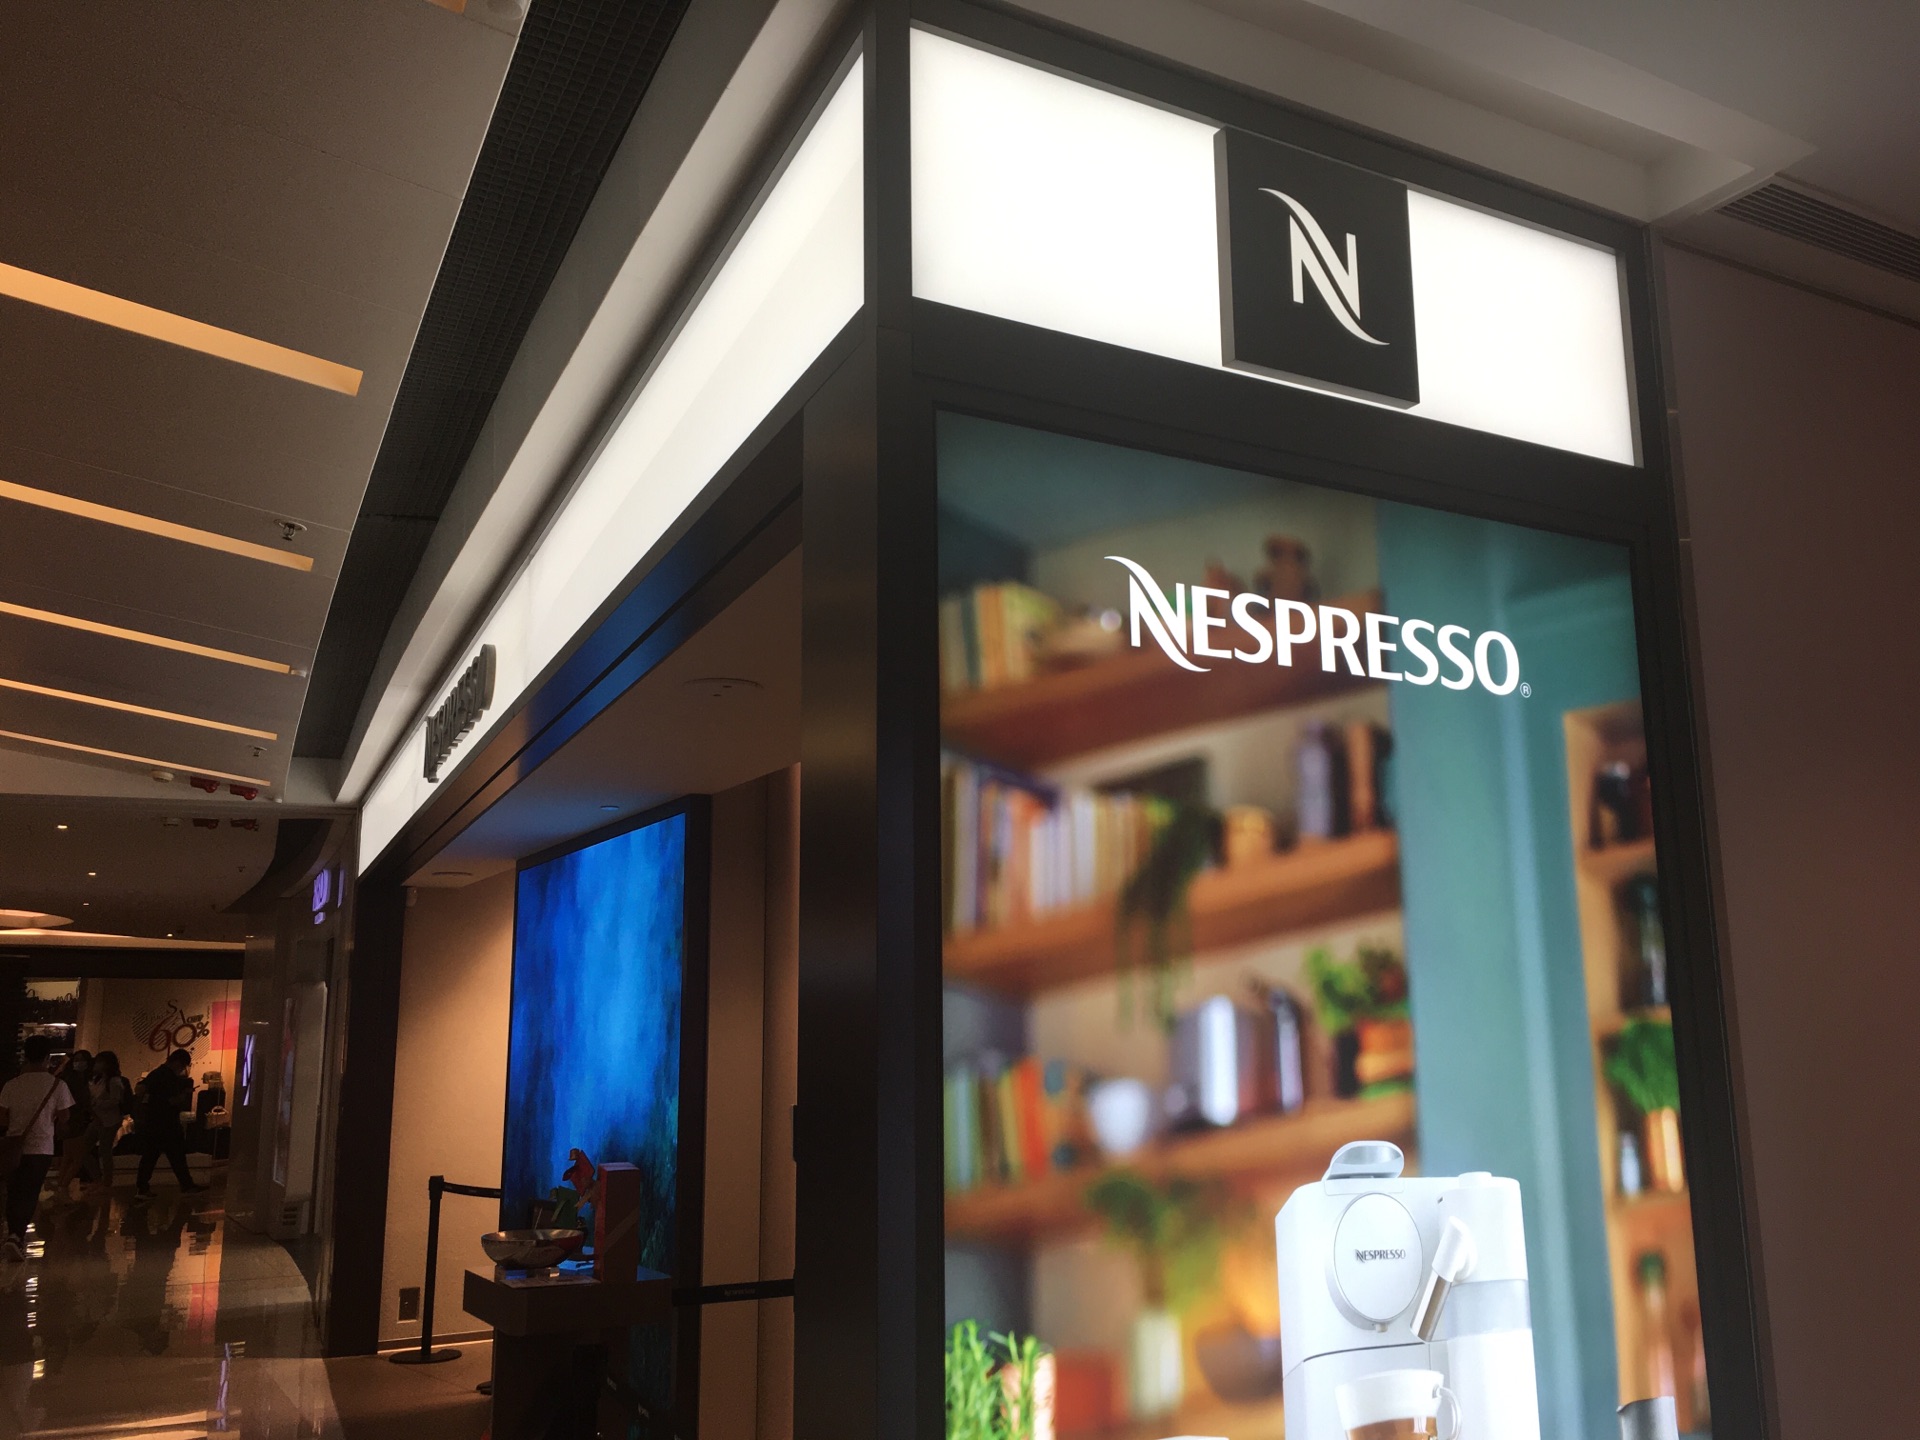 Shopping itineraries in Nespresso Boutique apm in 2023-06-20T17:00:00-07:00  (updated in 2023-06-20T17:00:00-07:00) - Trip.com